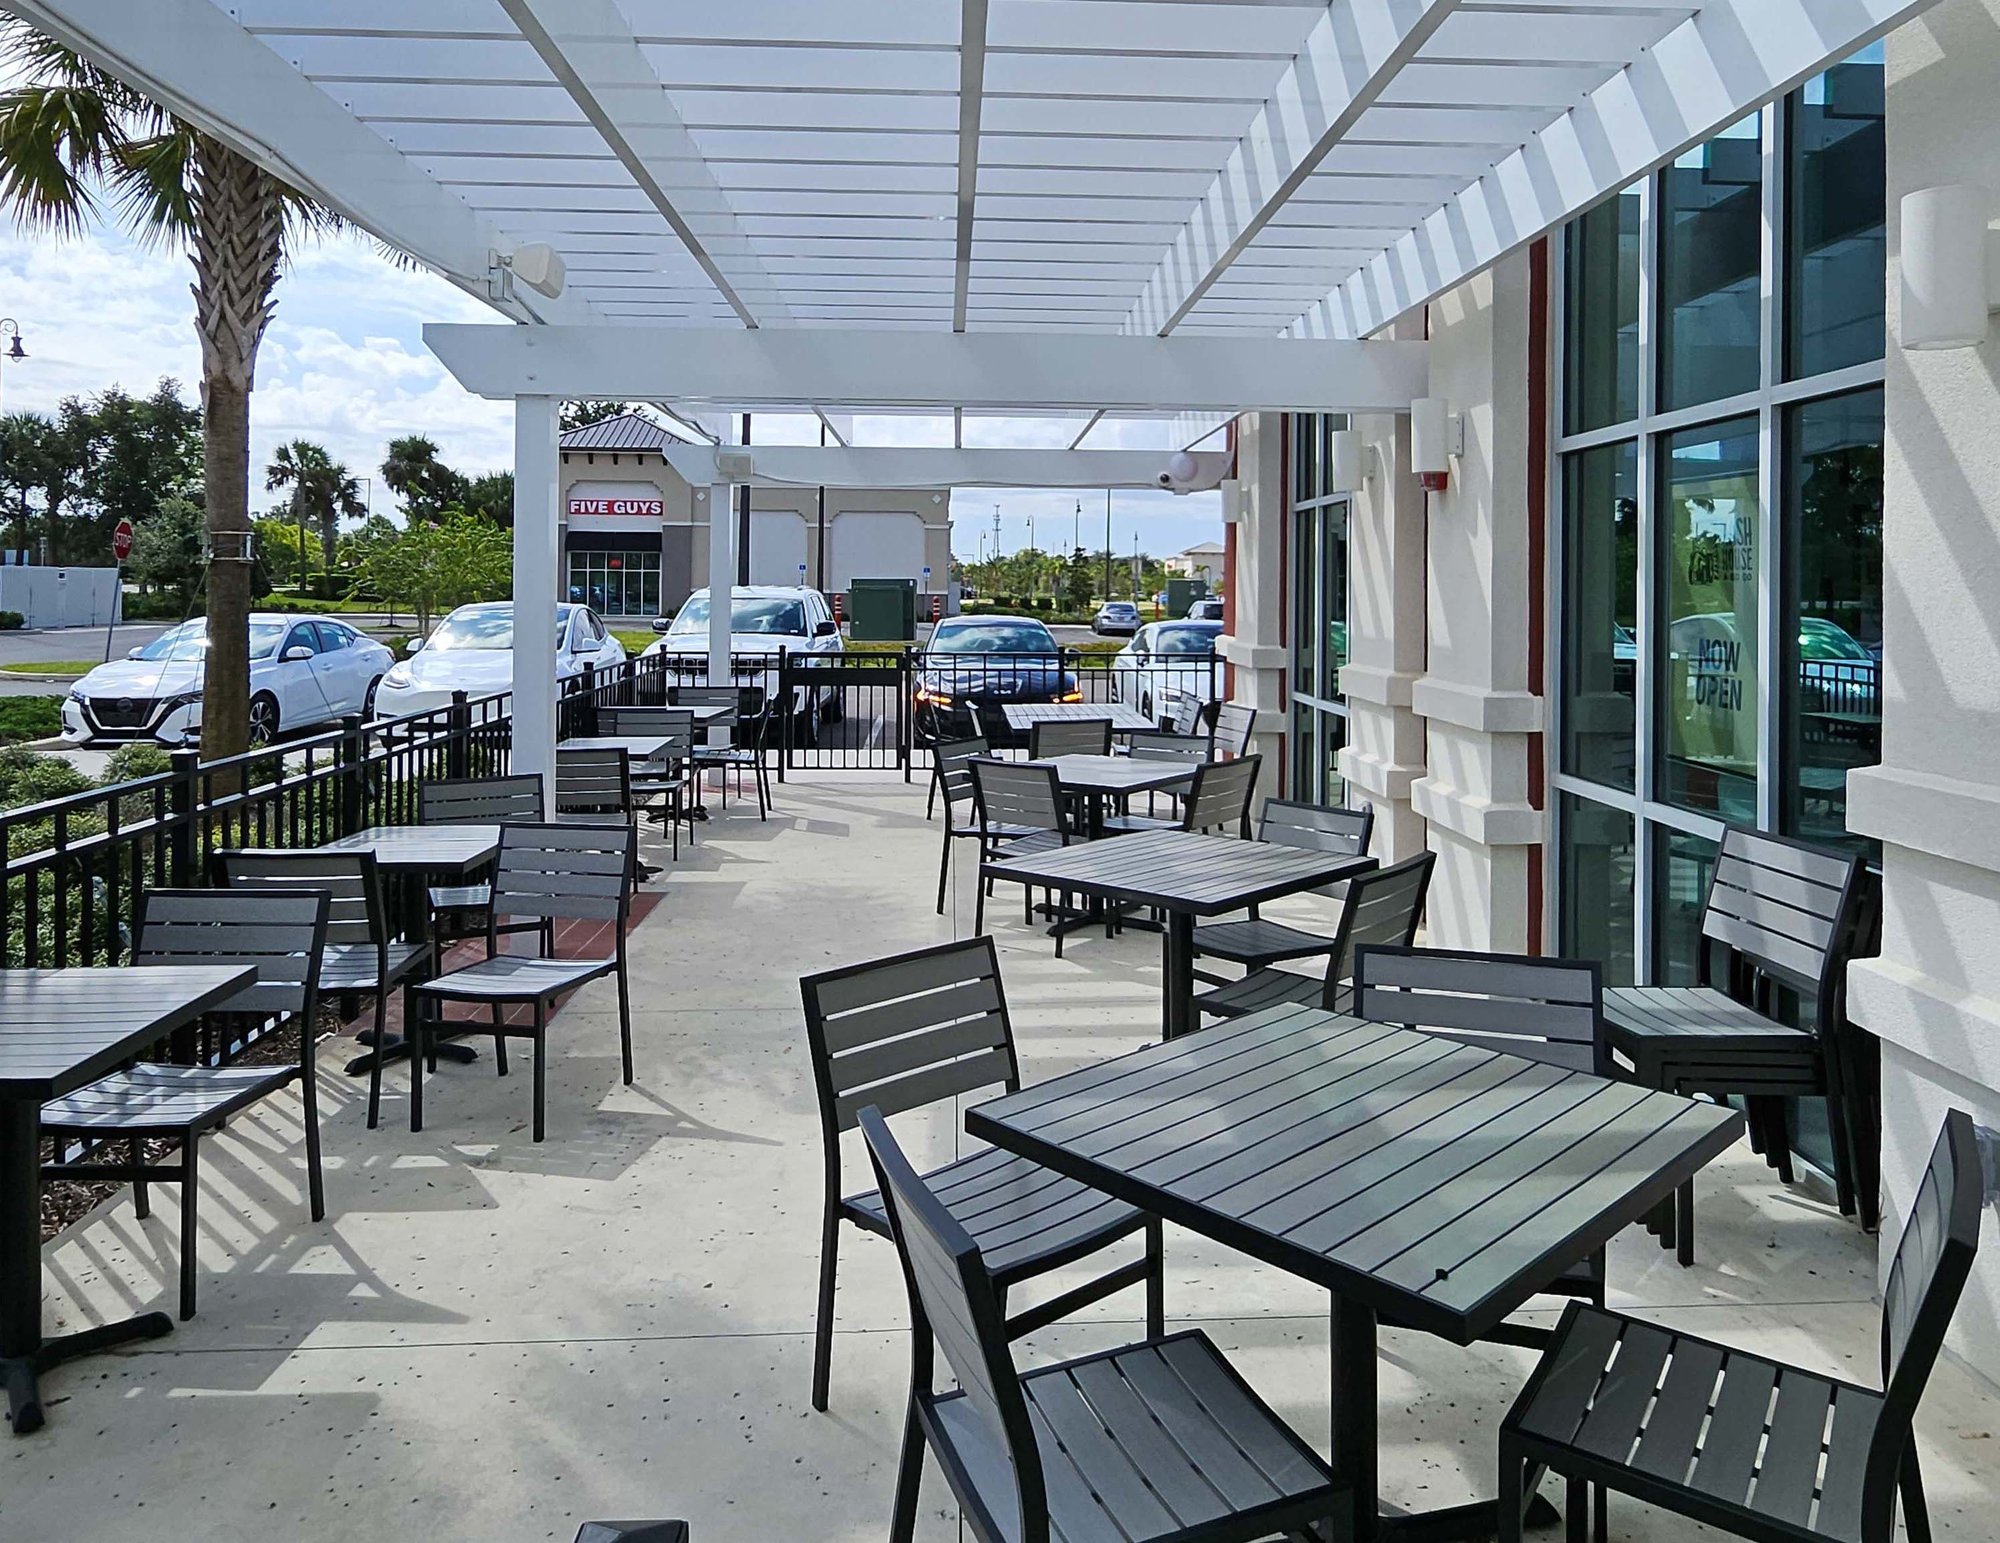 outside seating area with black chairs and a white awning